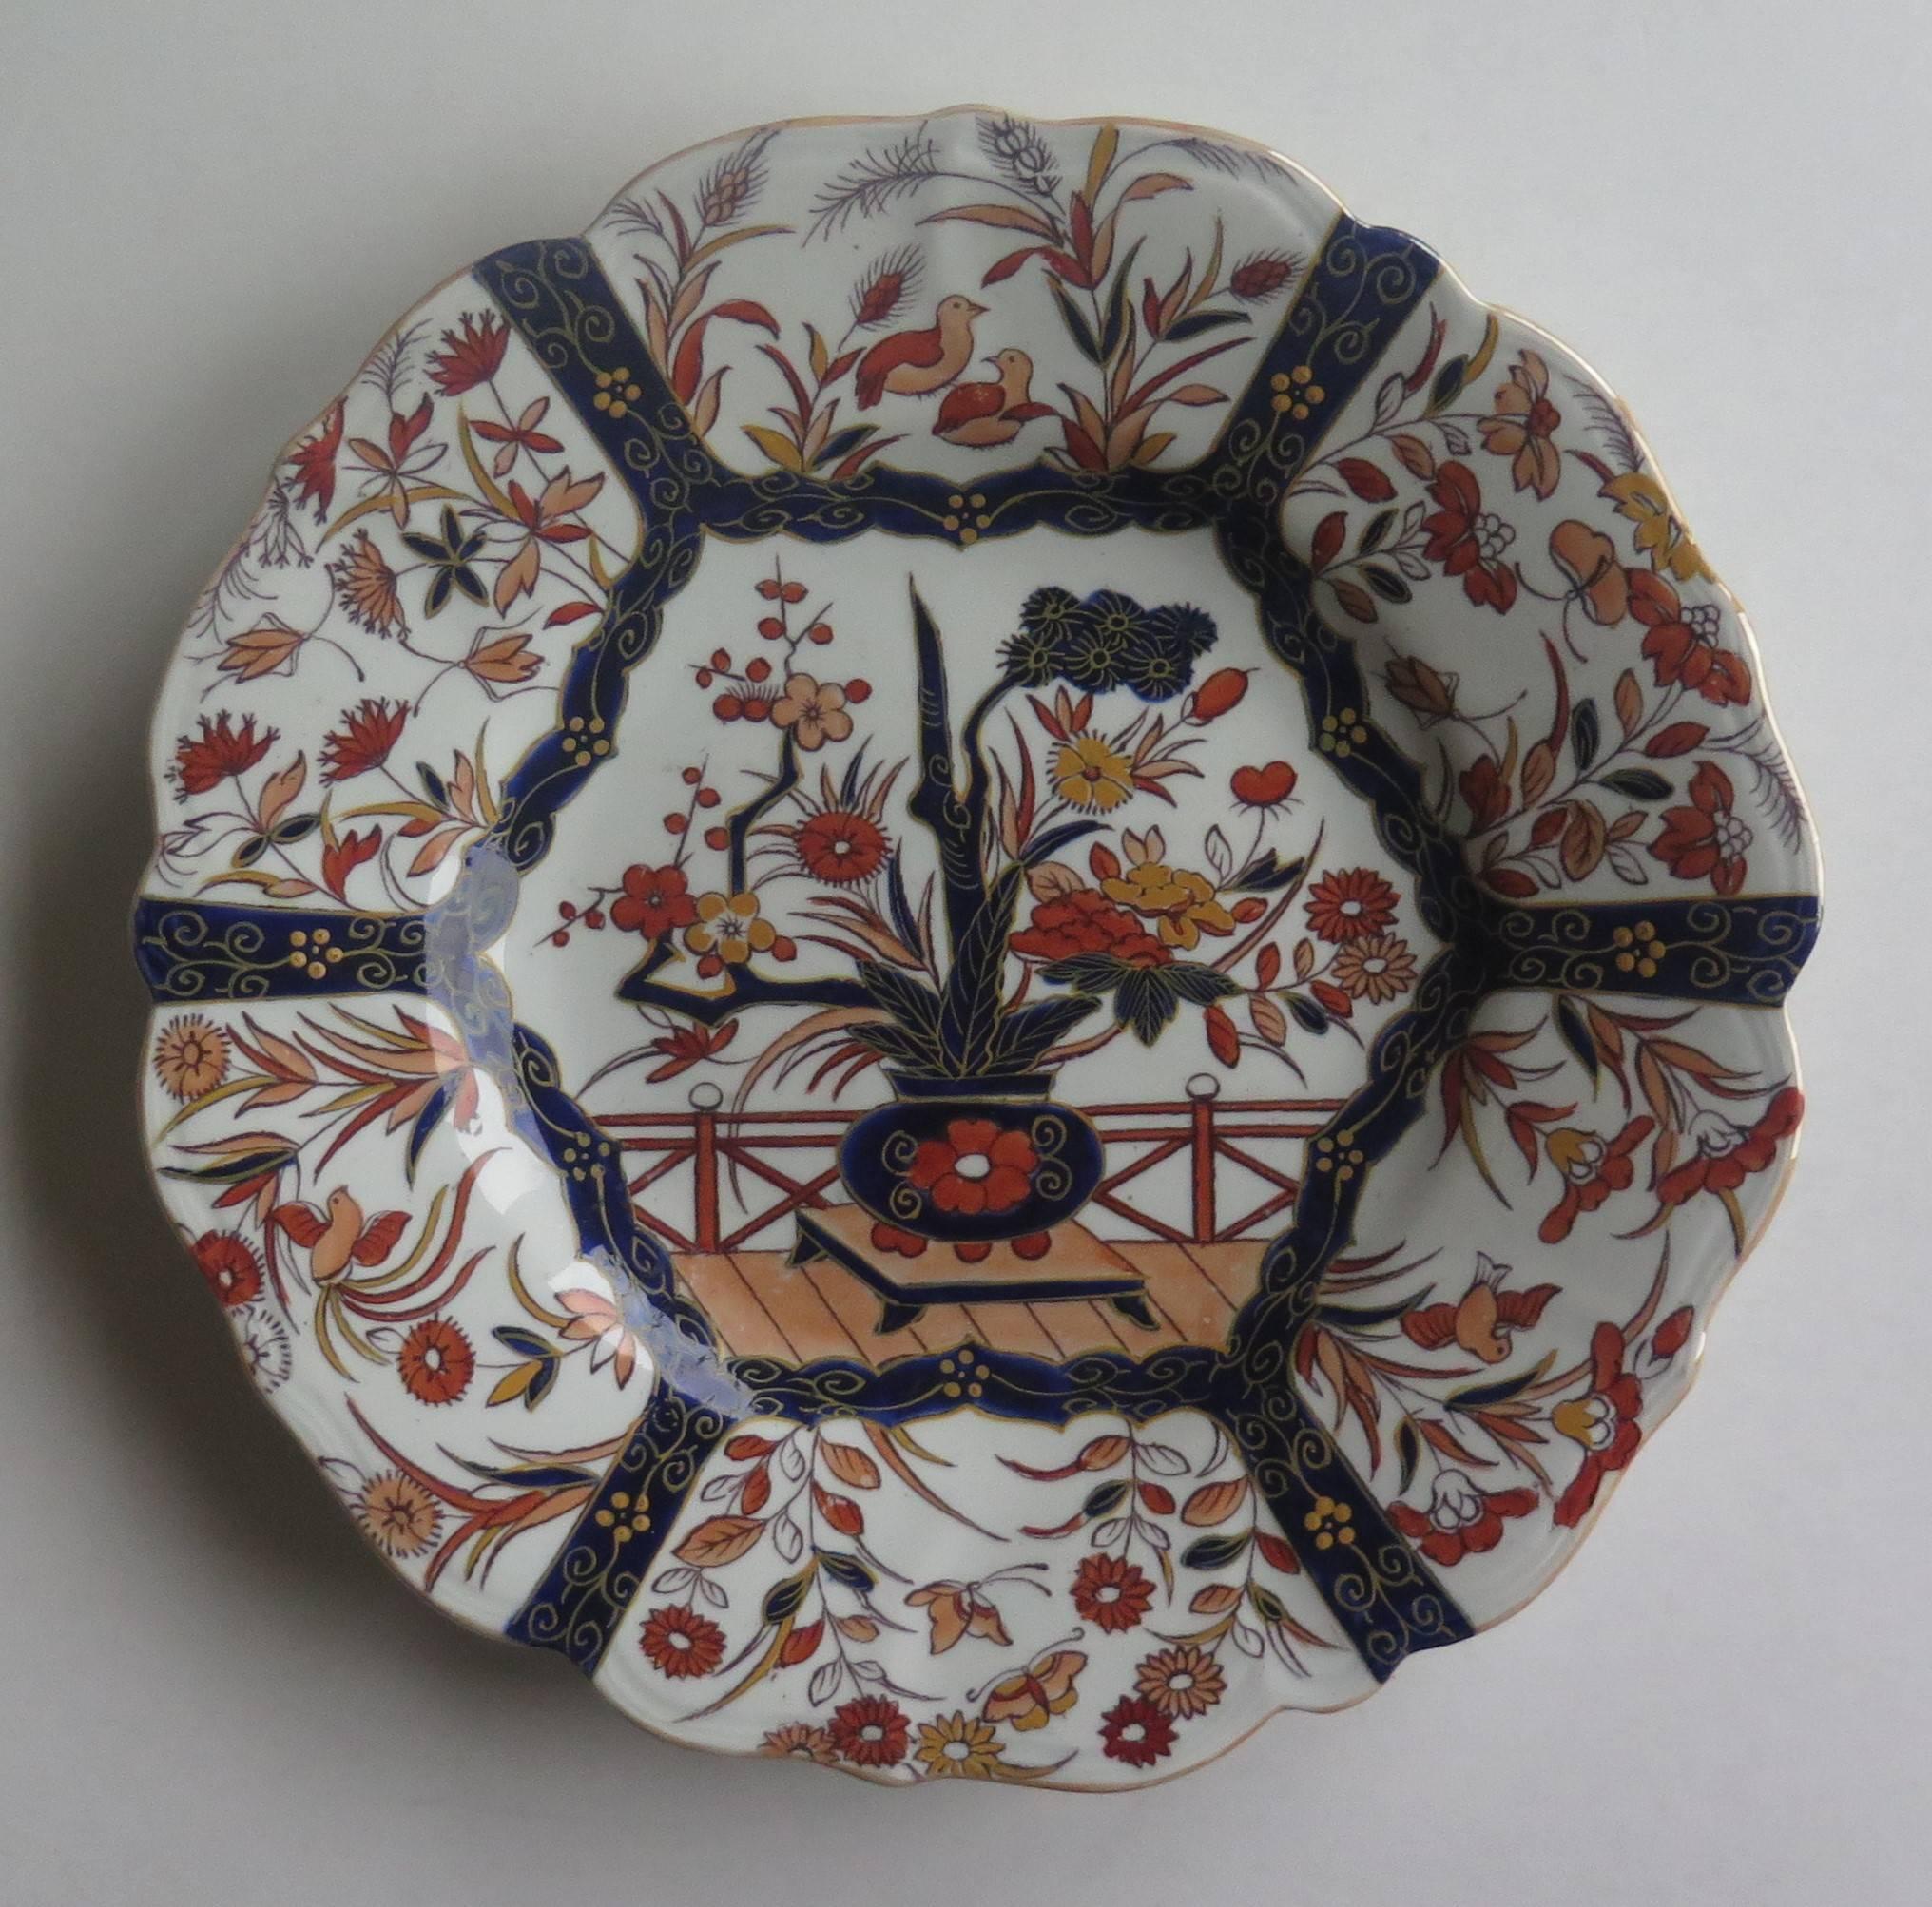 This is a very attractive Desert Plate or Dish made by Mason's Patent Ironstone China, dating to the earlier part of the 19th century.

This plate is decorated in the Fence and Bowl pattern, which shows a central flower filled vase, on a low stand